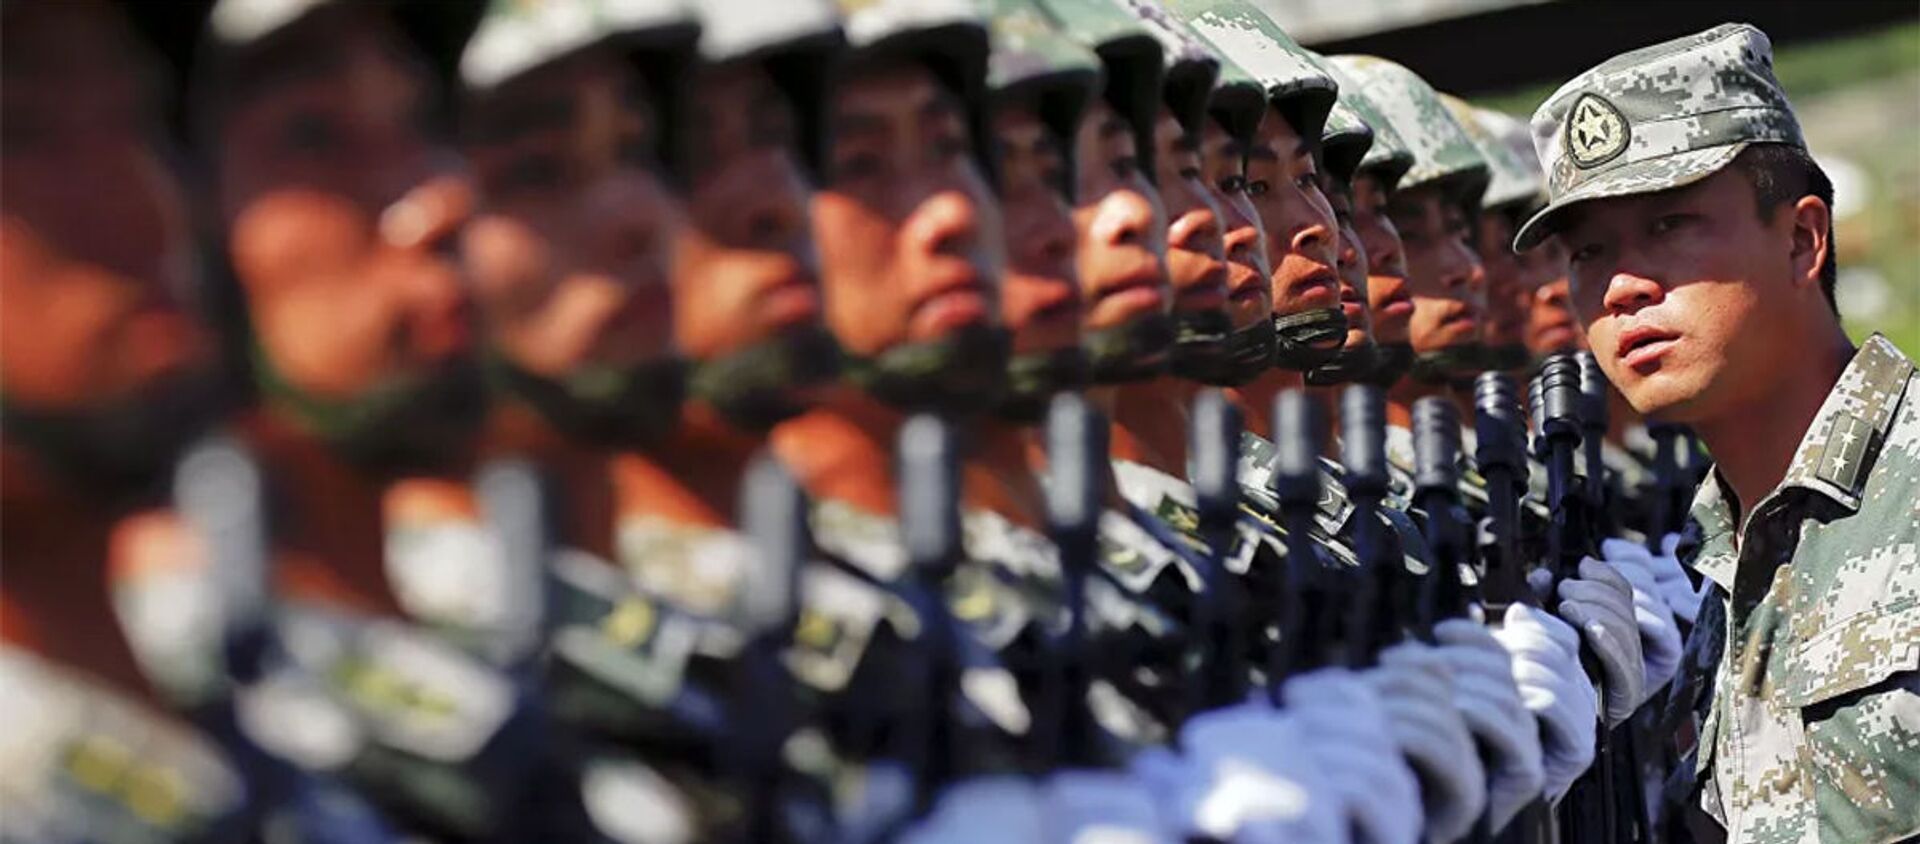 An officer gives instructions as soldiers of China's People's Liberation Army form a line during a training session for a military parade to mark the 70th anniversary of the end of World War Two, at a military base in Beijing, China, August 22, 2015 - 俄罗斯卫星通讯社, 1920, 18.08.2021